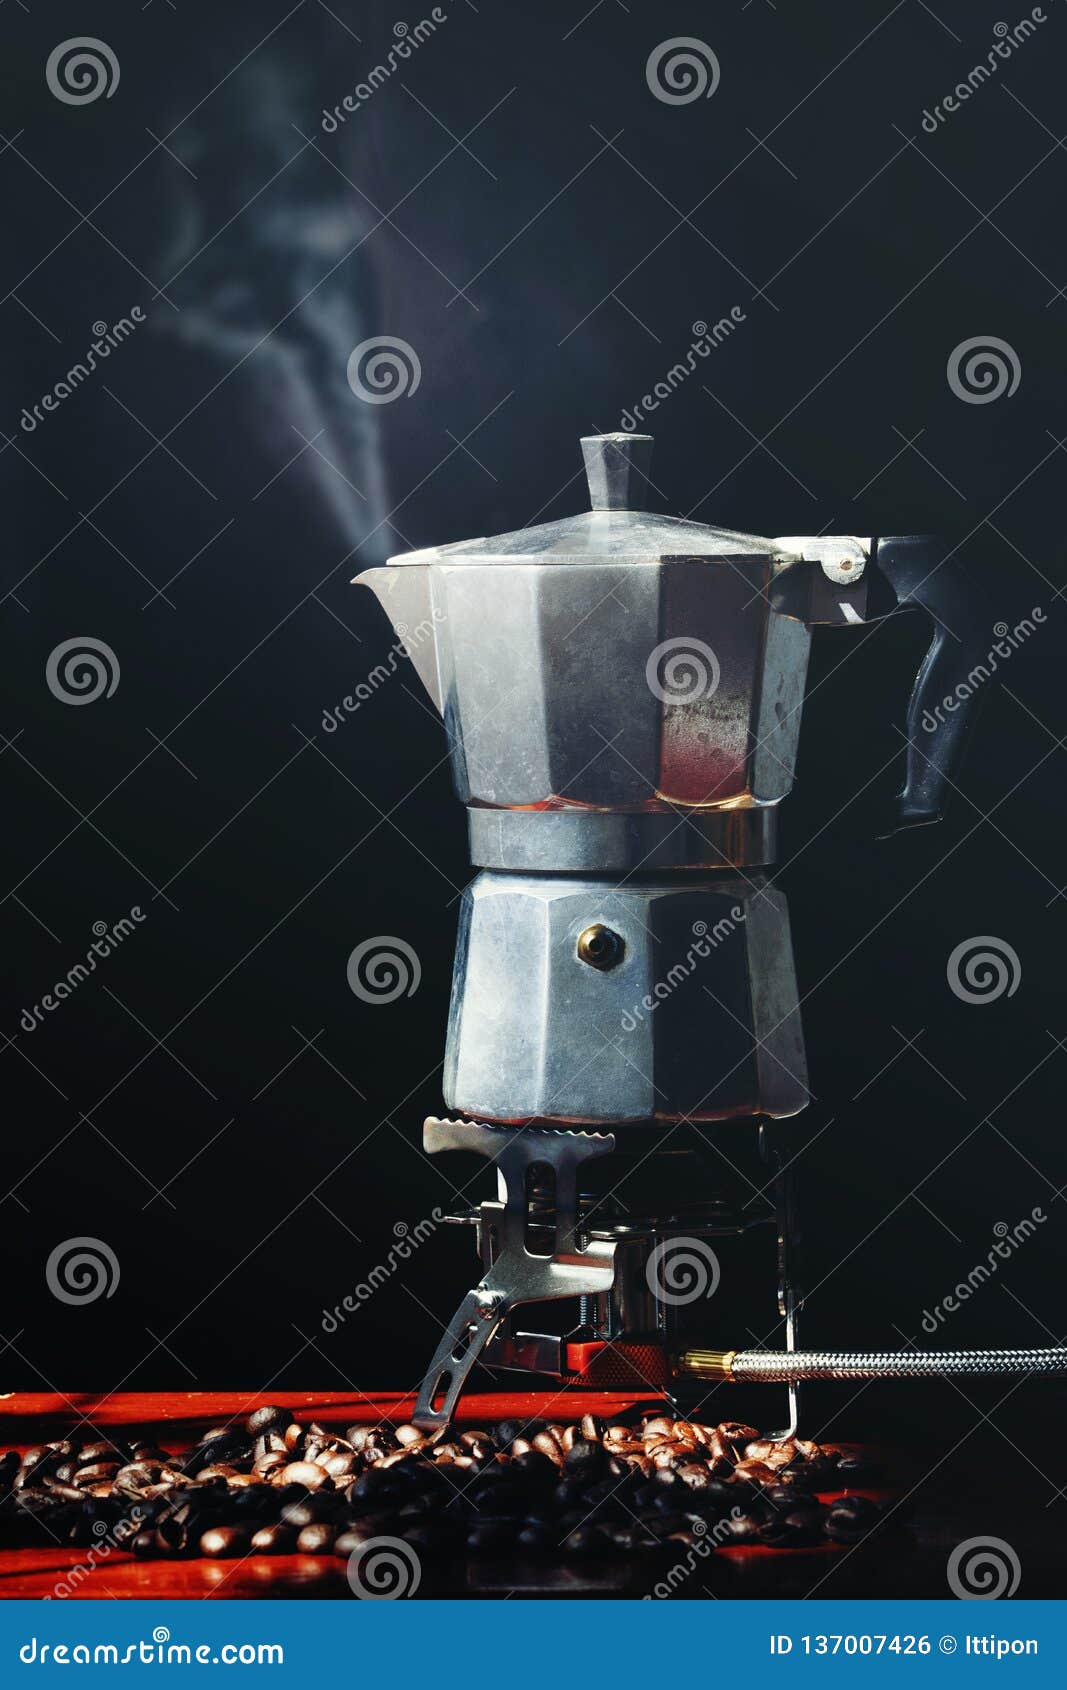 moka pot old coffee maker and coffee beans